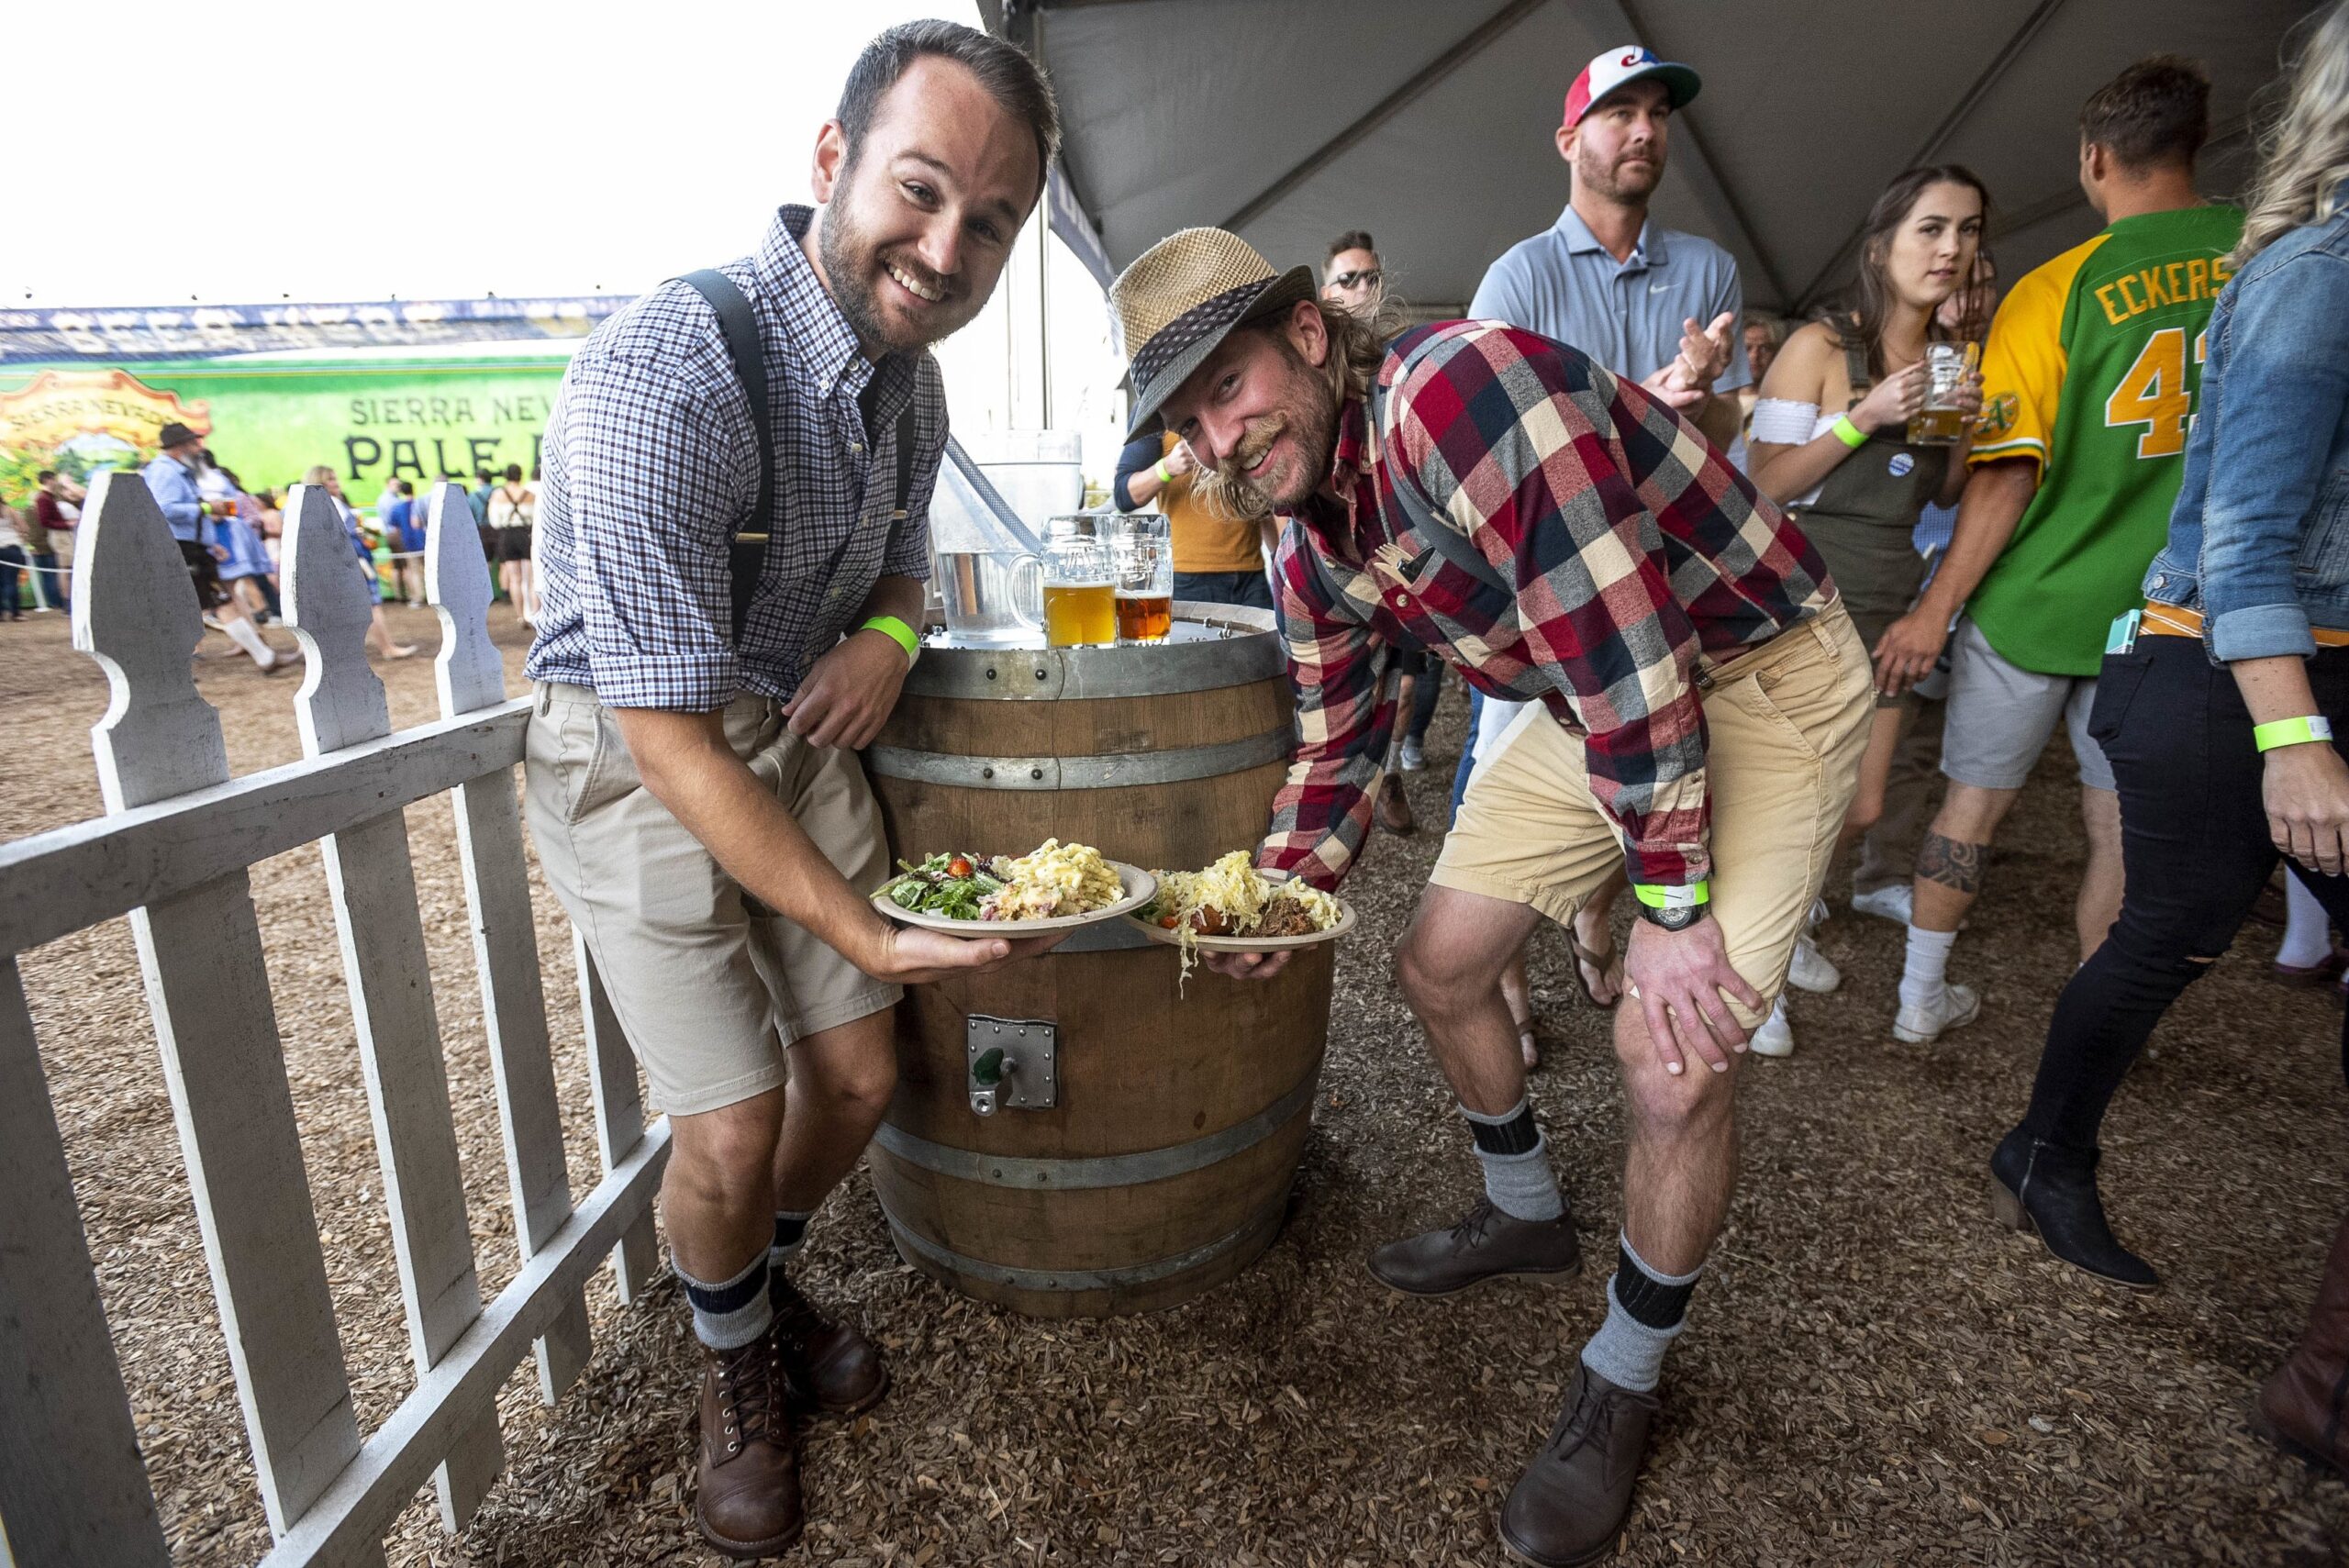 Group of people at Oktoberfest with plates of barrel-aged sauerkraut